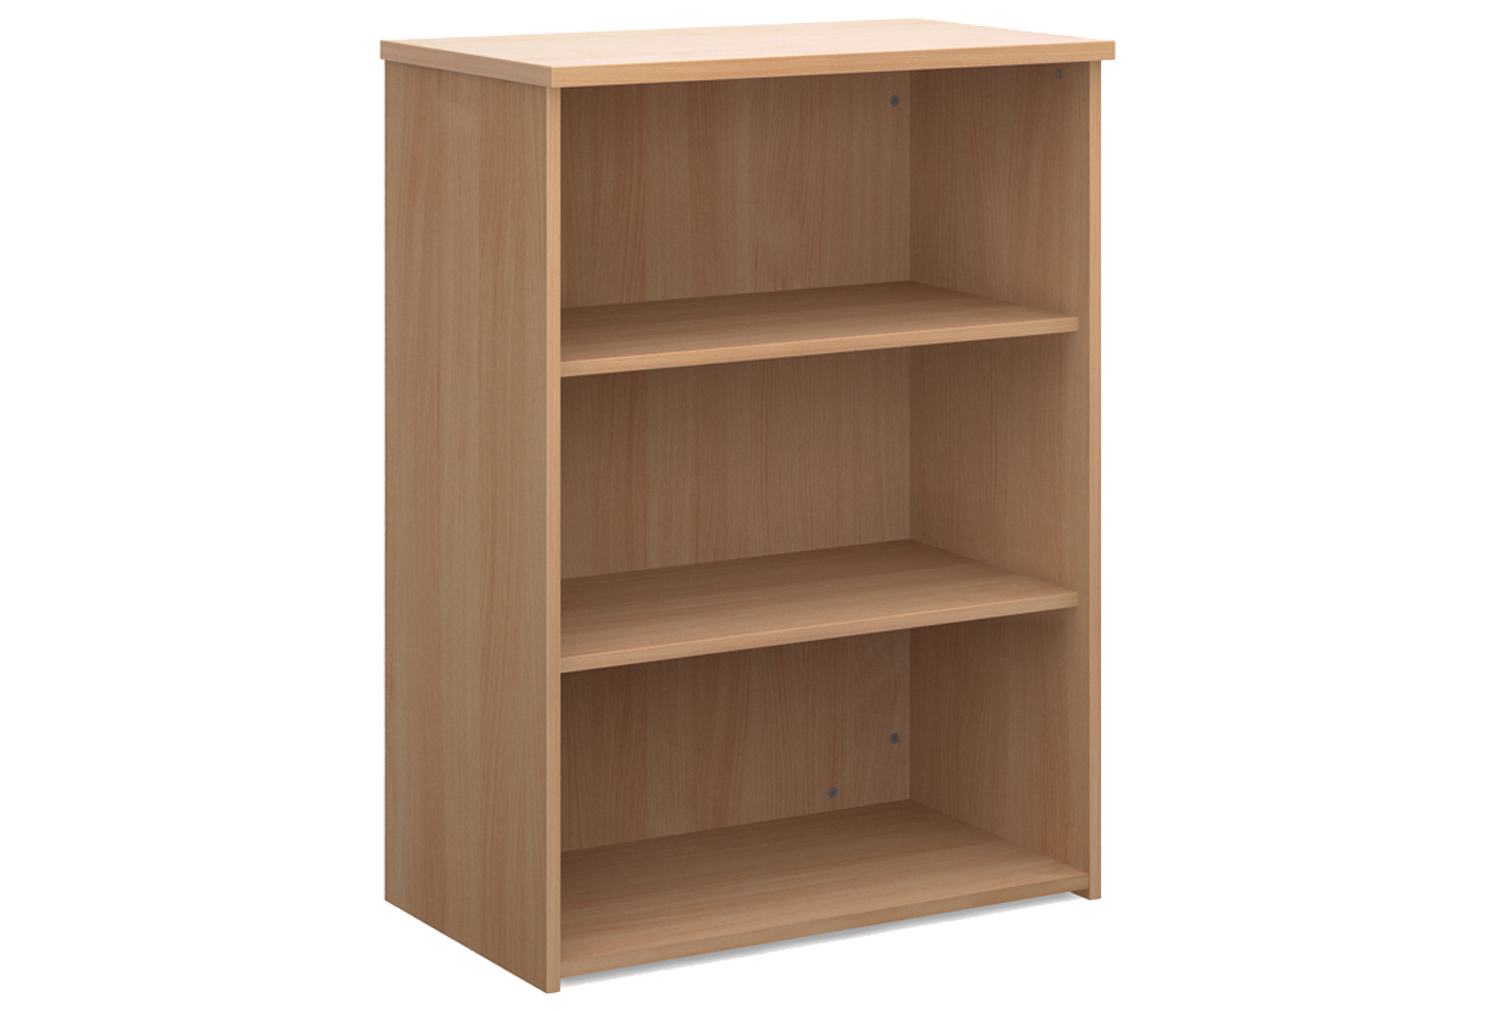 Value Line Office Bookcases, 2 Shelf - 80wx47dx109h (cm), Beech, Express Delivery